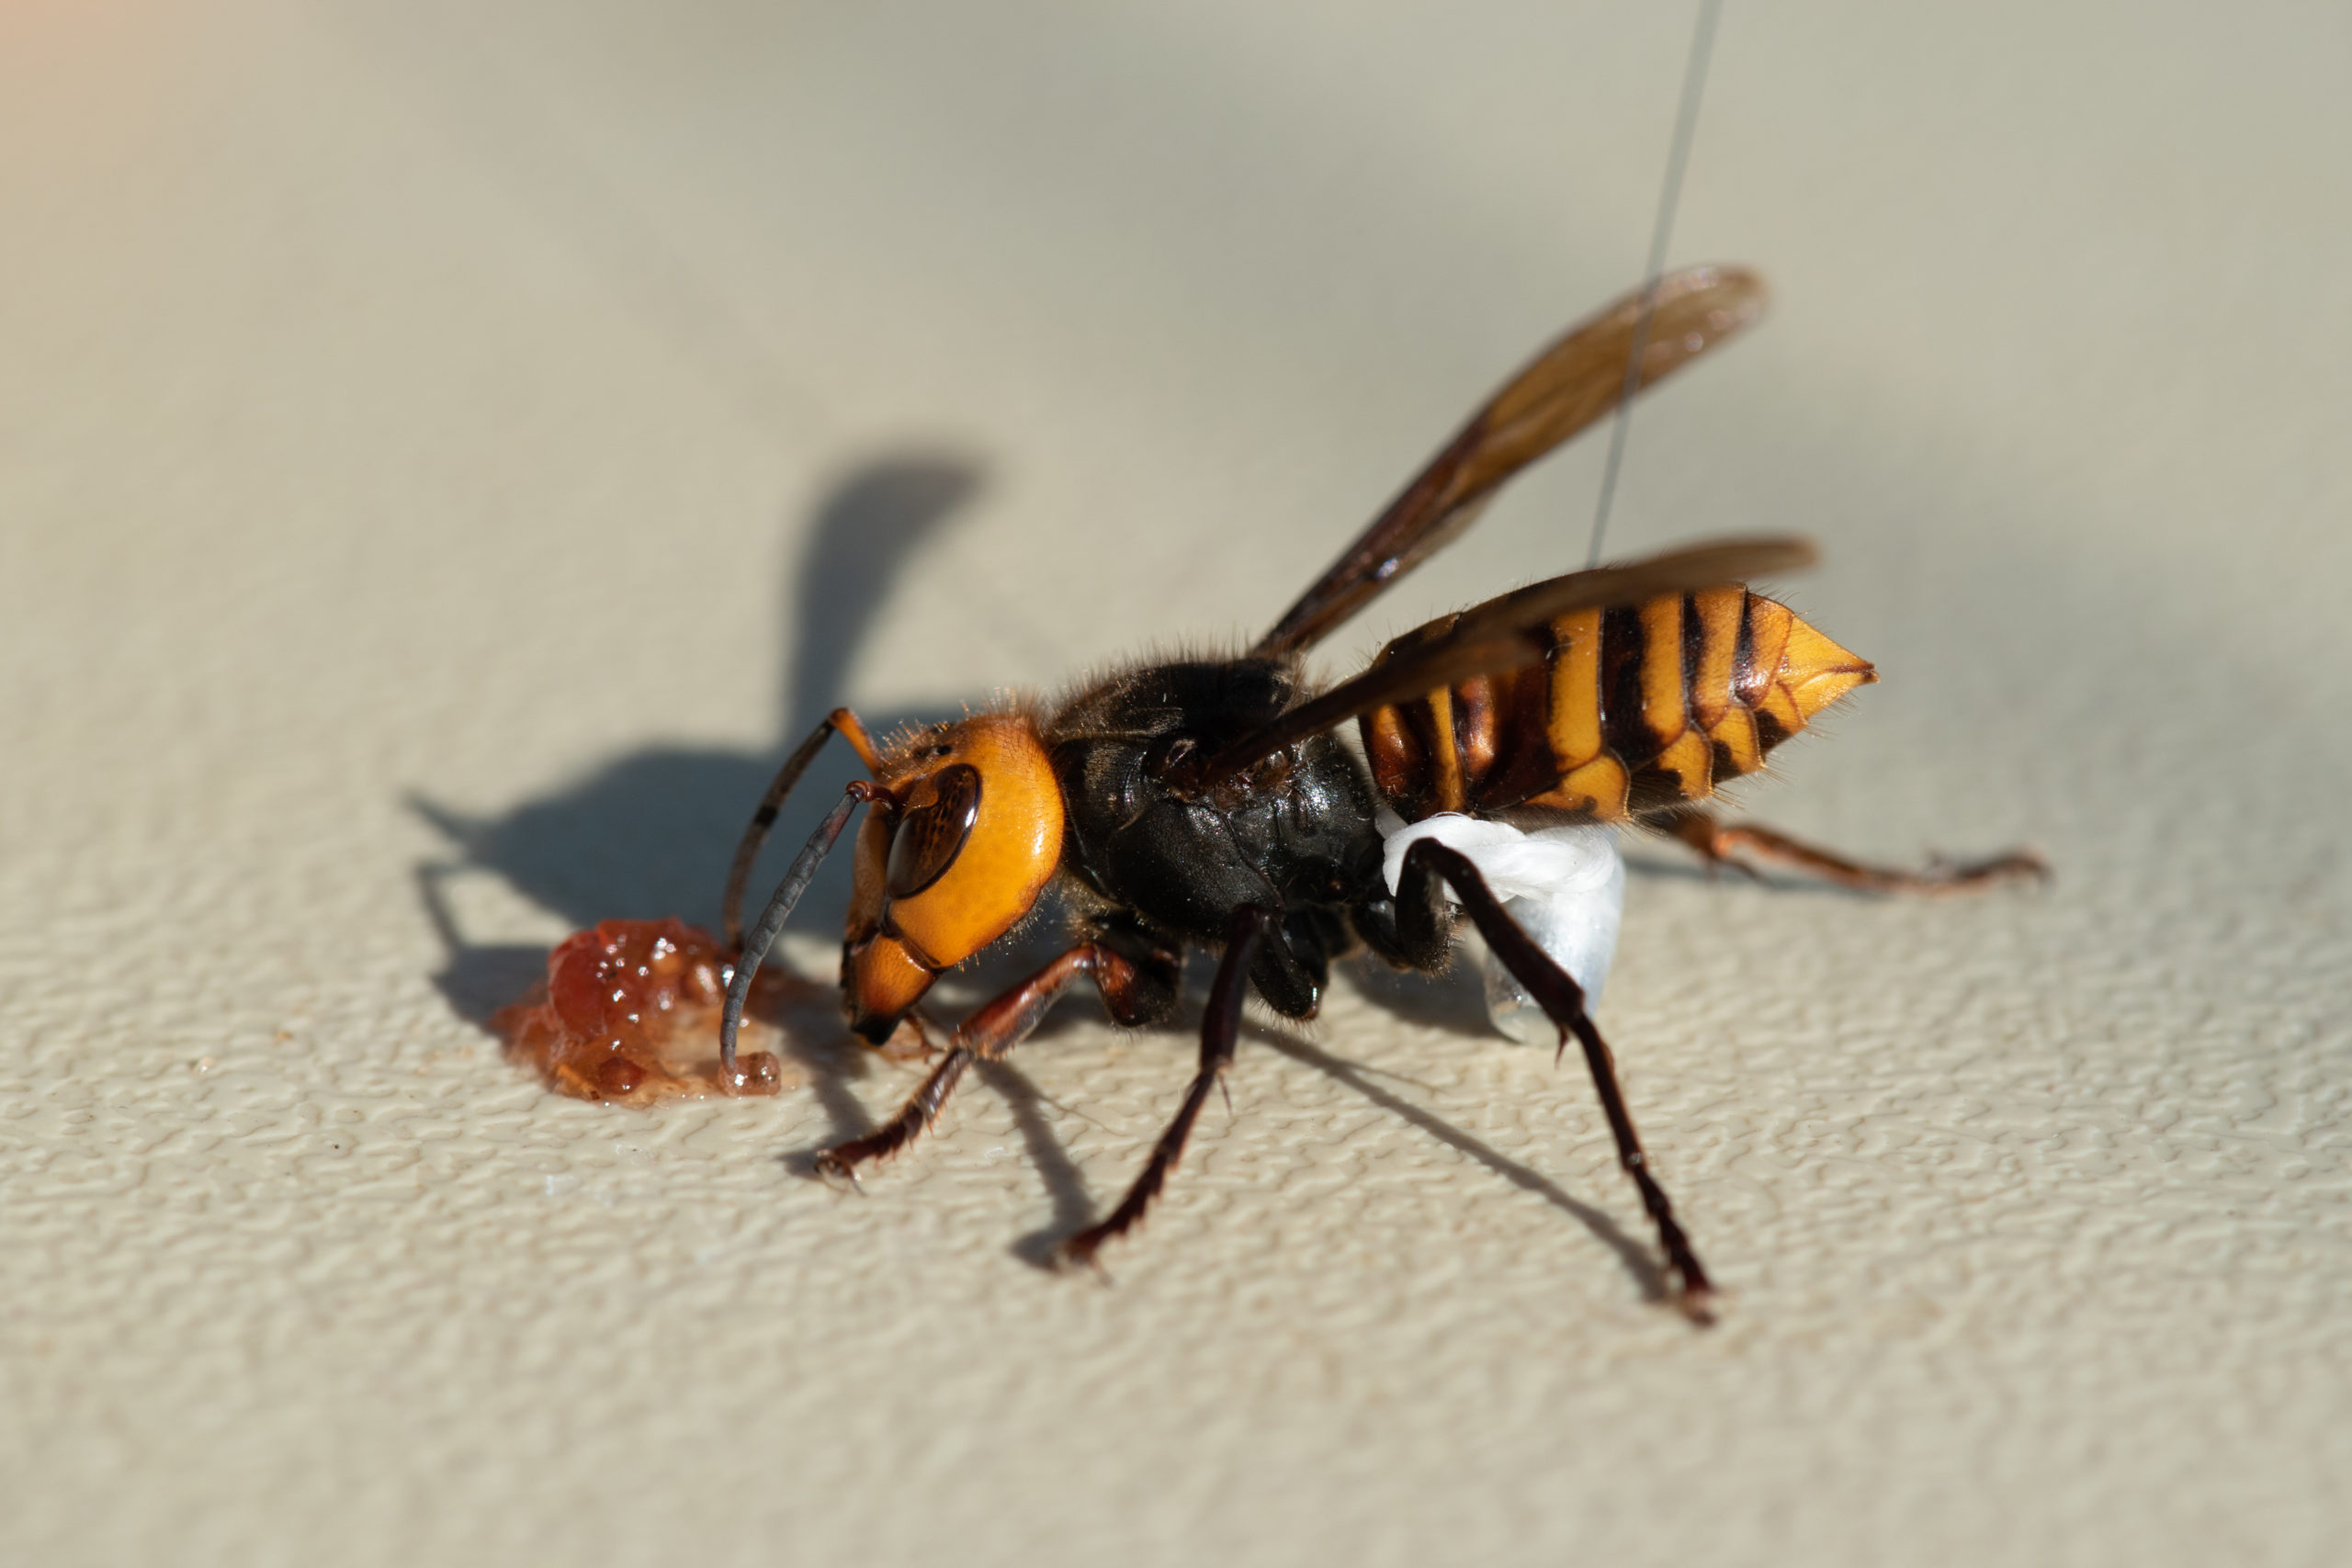 One of the Asian giant hornets captured by entomologists from the Washington State Department of Agriculture this week (Photo: Washington State Dept. of Agriculture)